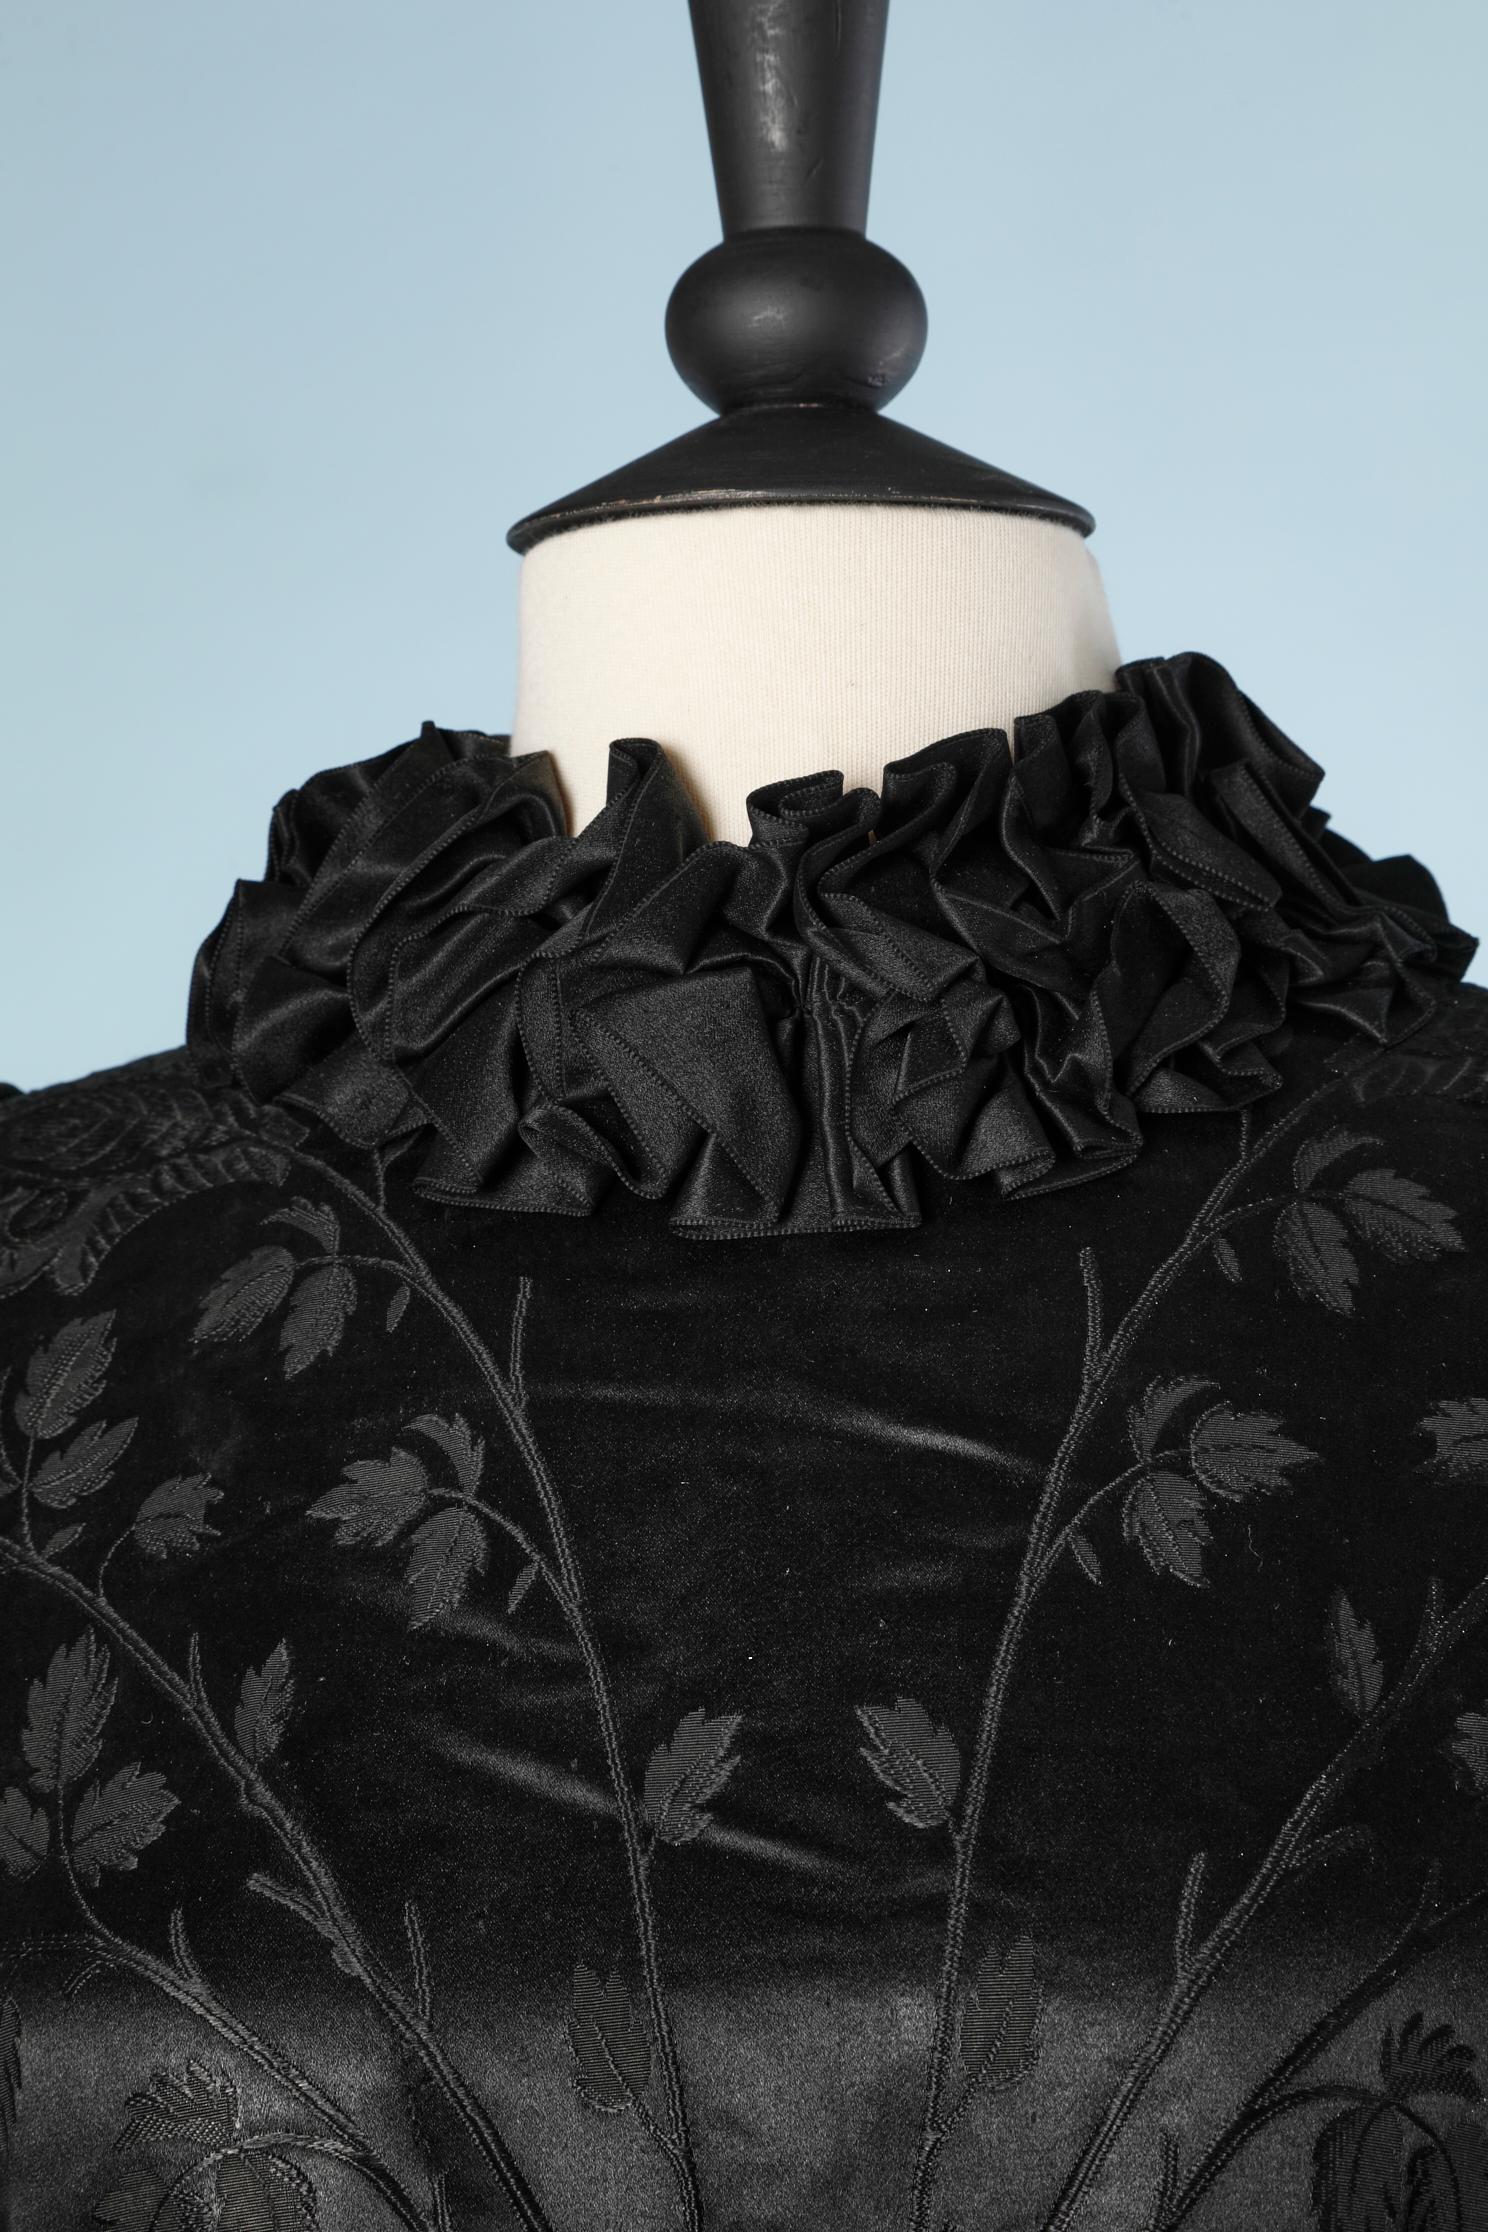 1898 Black jacquard damask silk dress with ruban ruffles around neck and bottom edge.
Lining in silk jacquard as well with ruffles on the bottom edge. 
Tiny buttons to close the dress on the middle back and some on the cuffs as well.